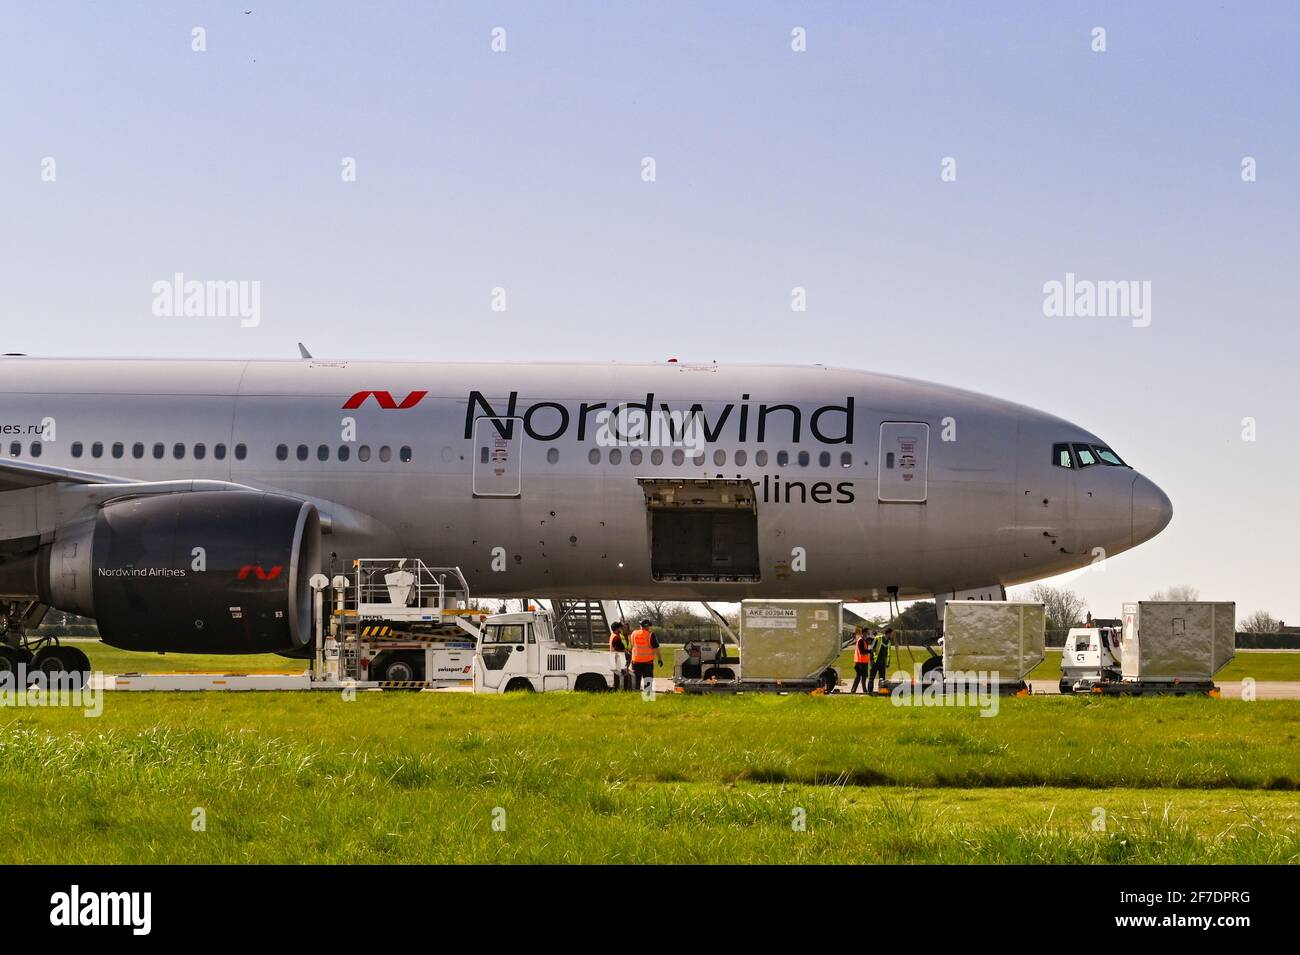 Cardiff, Wales - March 2021: Boeing 777 of Nordwind Airlines (registraion VP-BJJ) with pallet loader and air freight pallets being unloaded at Cardiff Stock Photo